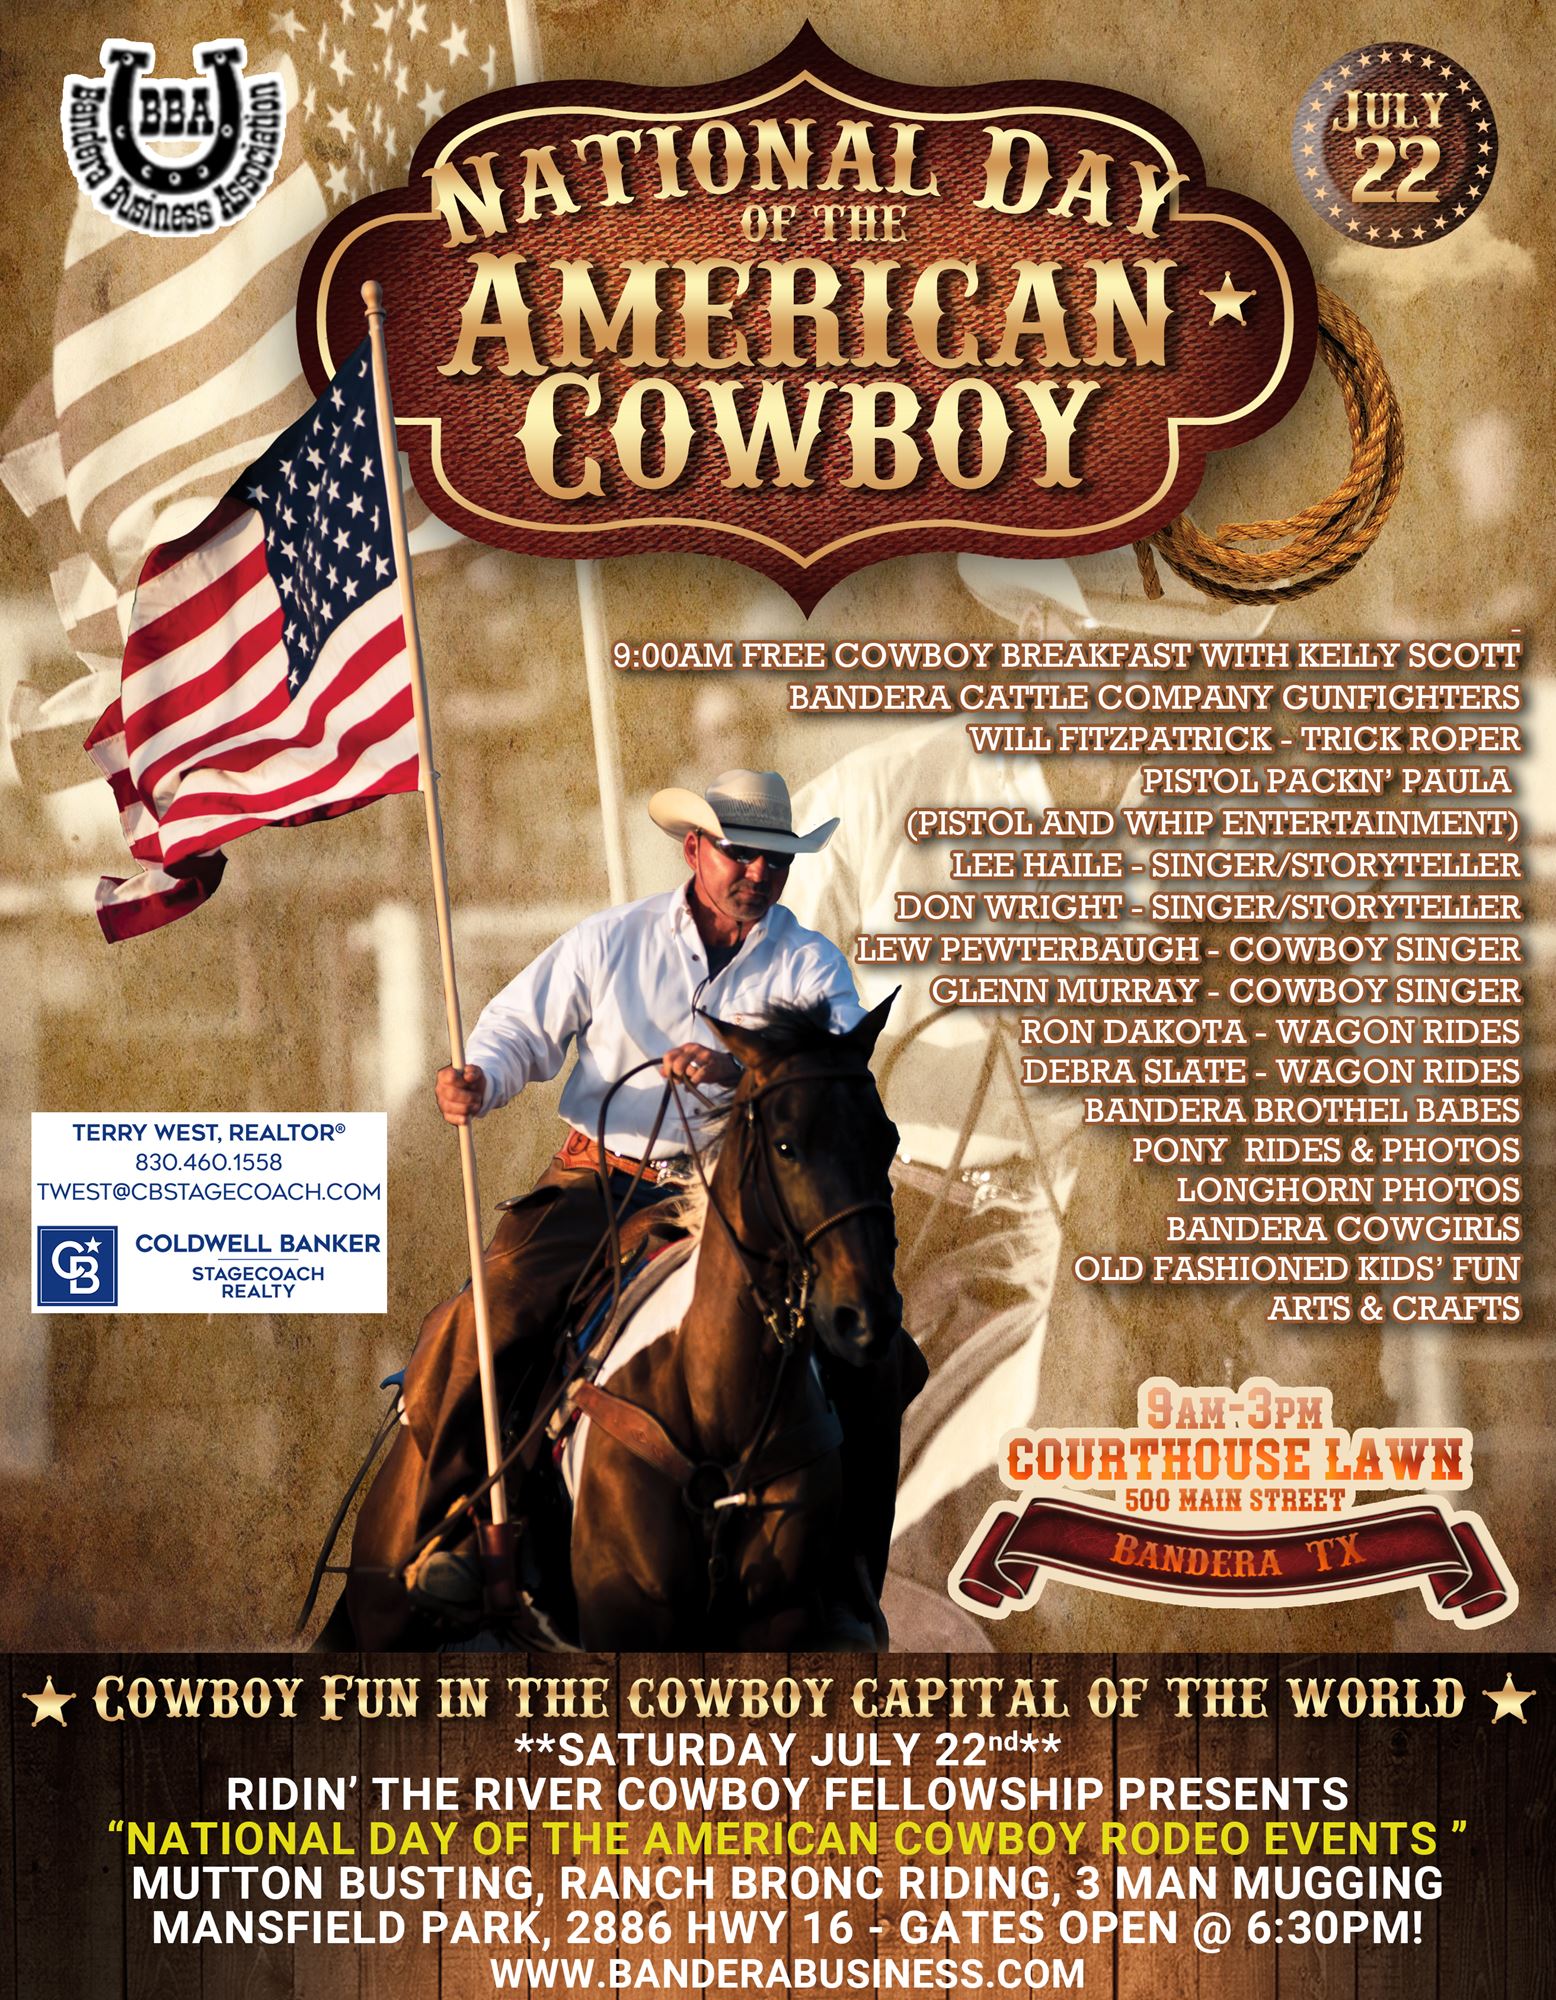 National Day of the American Cowboy